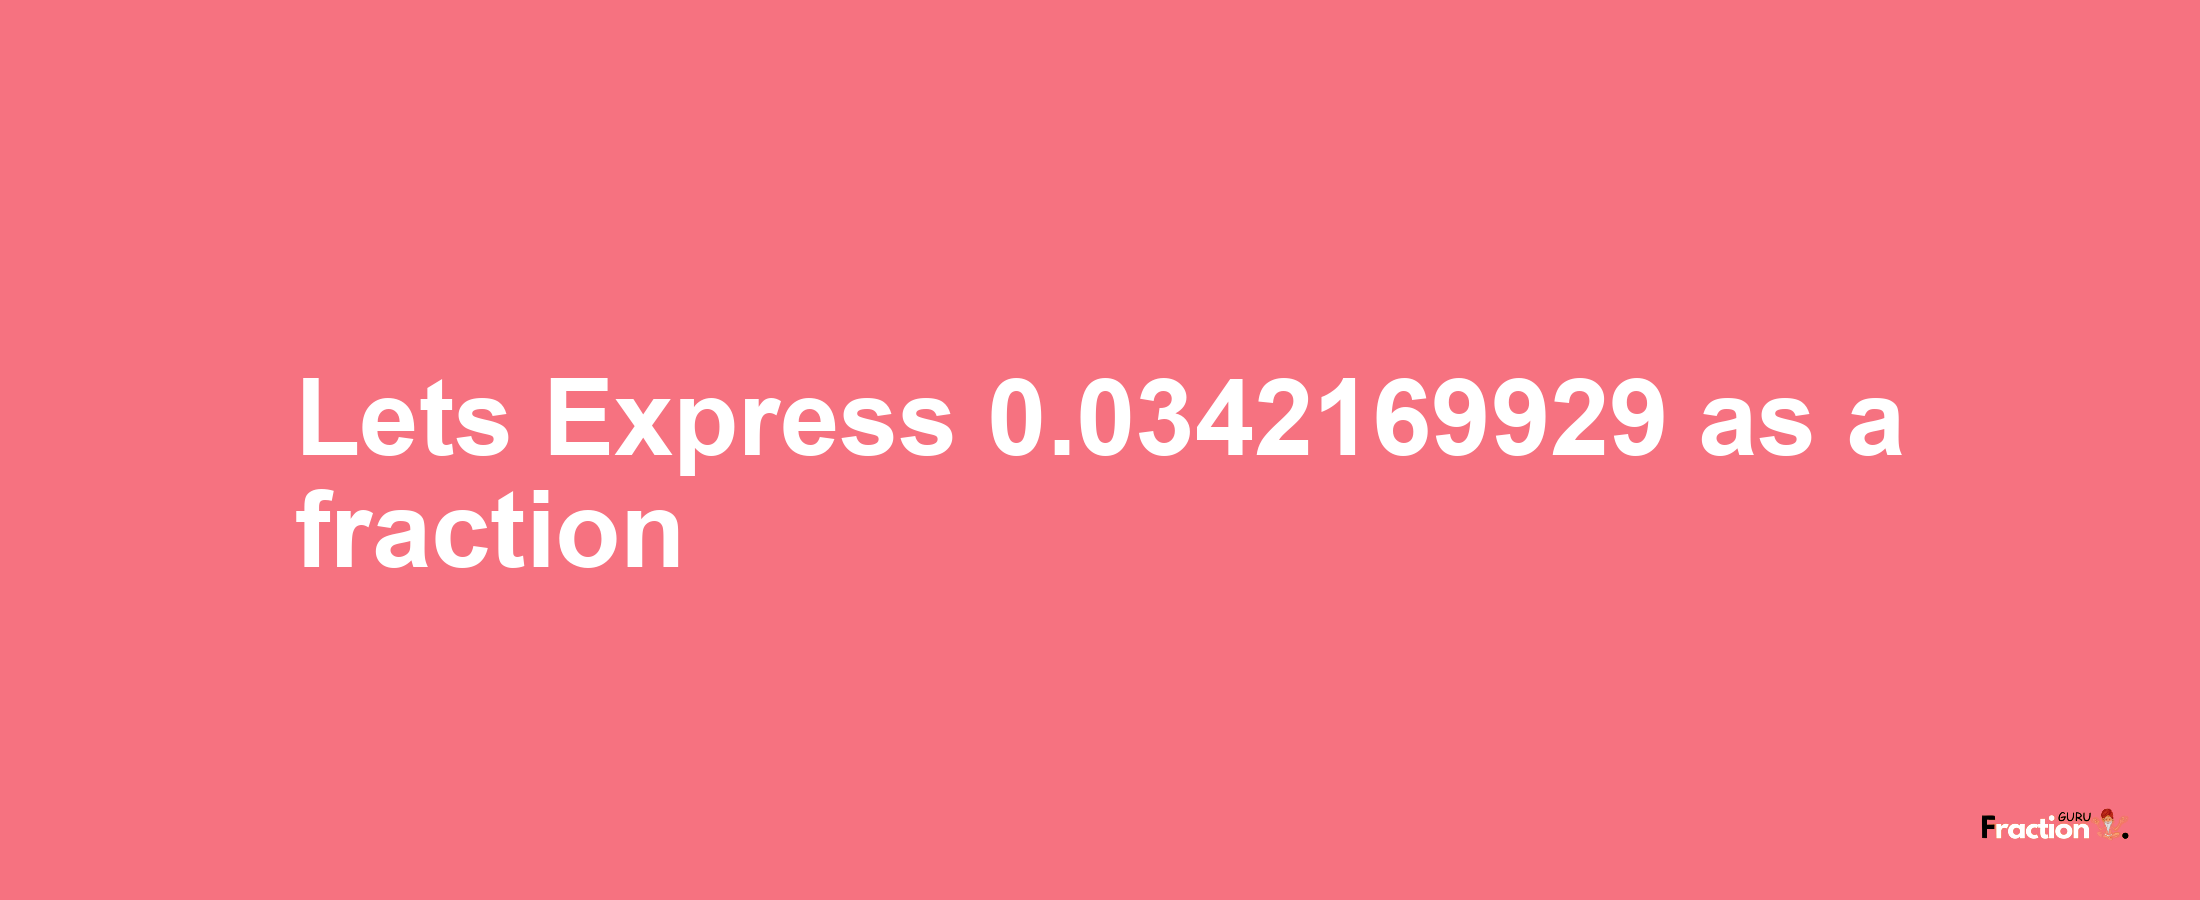 Lets Express 0.0342169929 as afraction